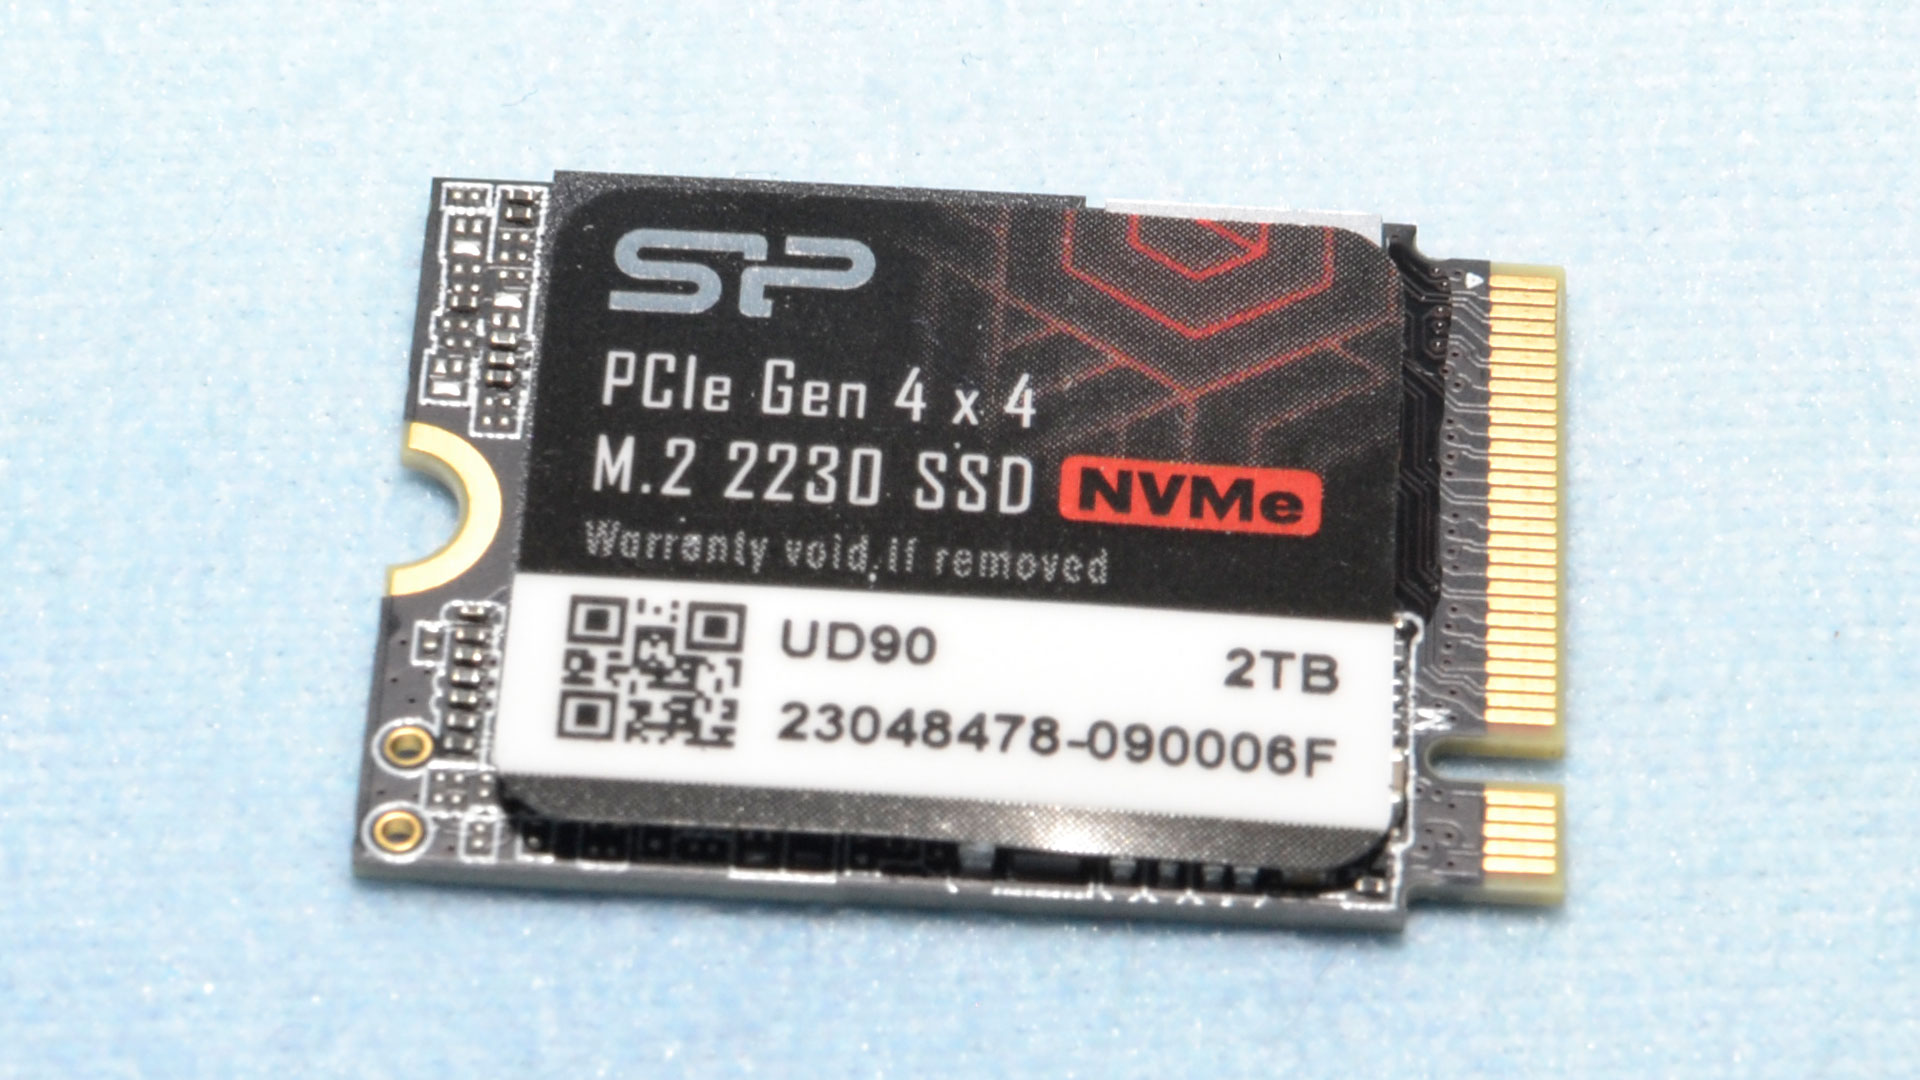 Addlink New S91 2TB 2230 NVMe High Performance PCIe Gen4x4 2230 3D NAND SSD  - Read Speed up to 5000 MB/s Compatible with Steam Deck, ROG Ally, Laptop